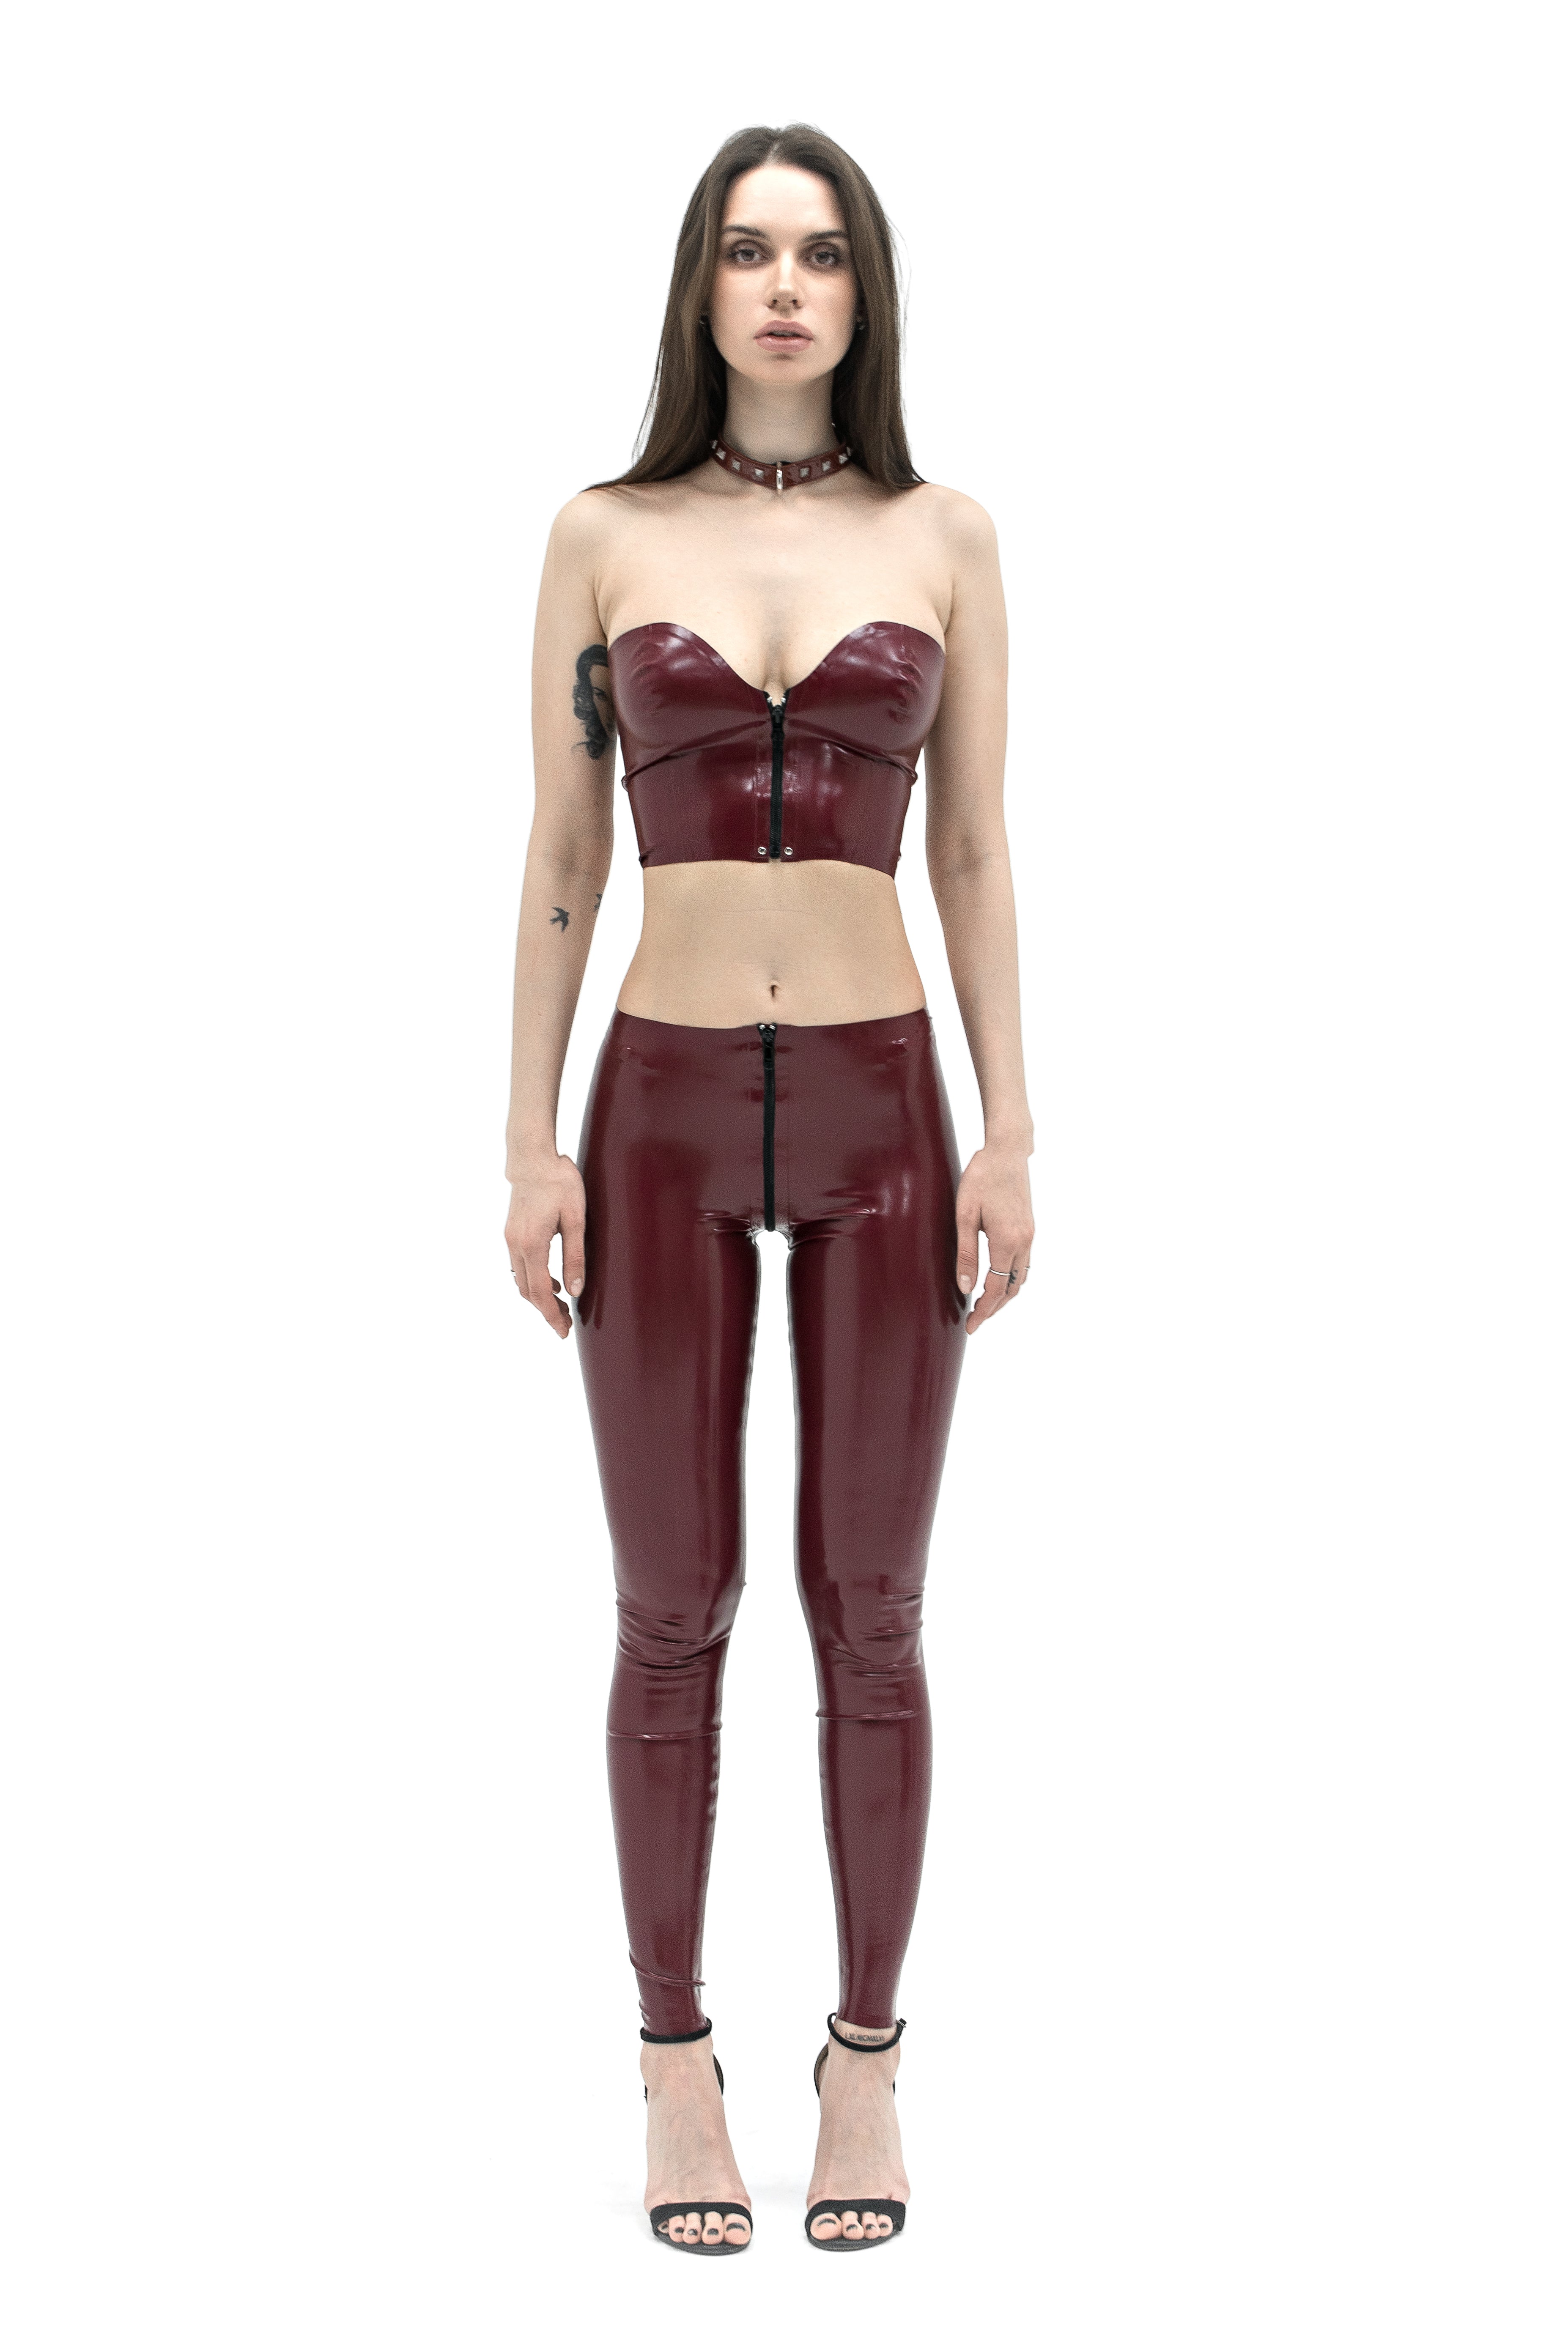 Latex top with front zipper. Cherry